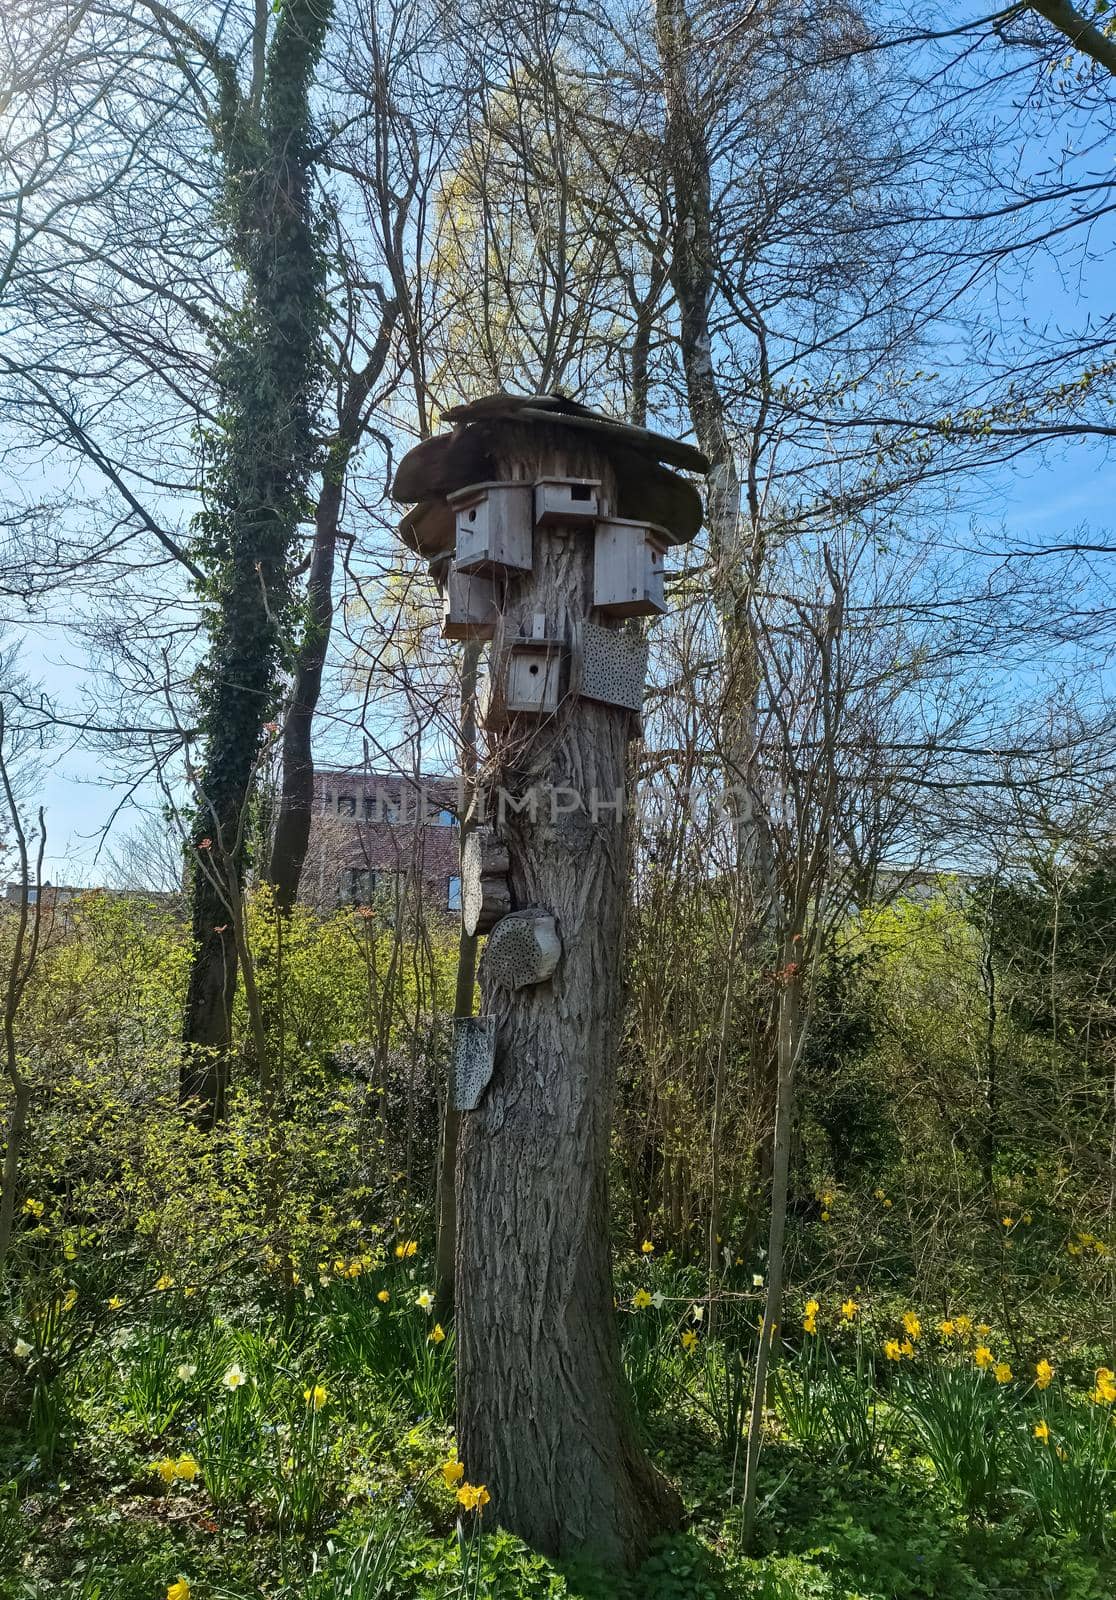 Several birdhouses and insect hotels on a tree in a park in northern Germany